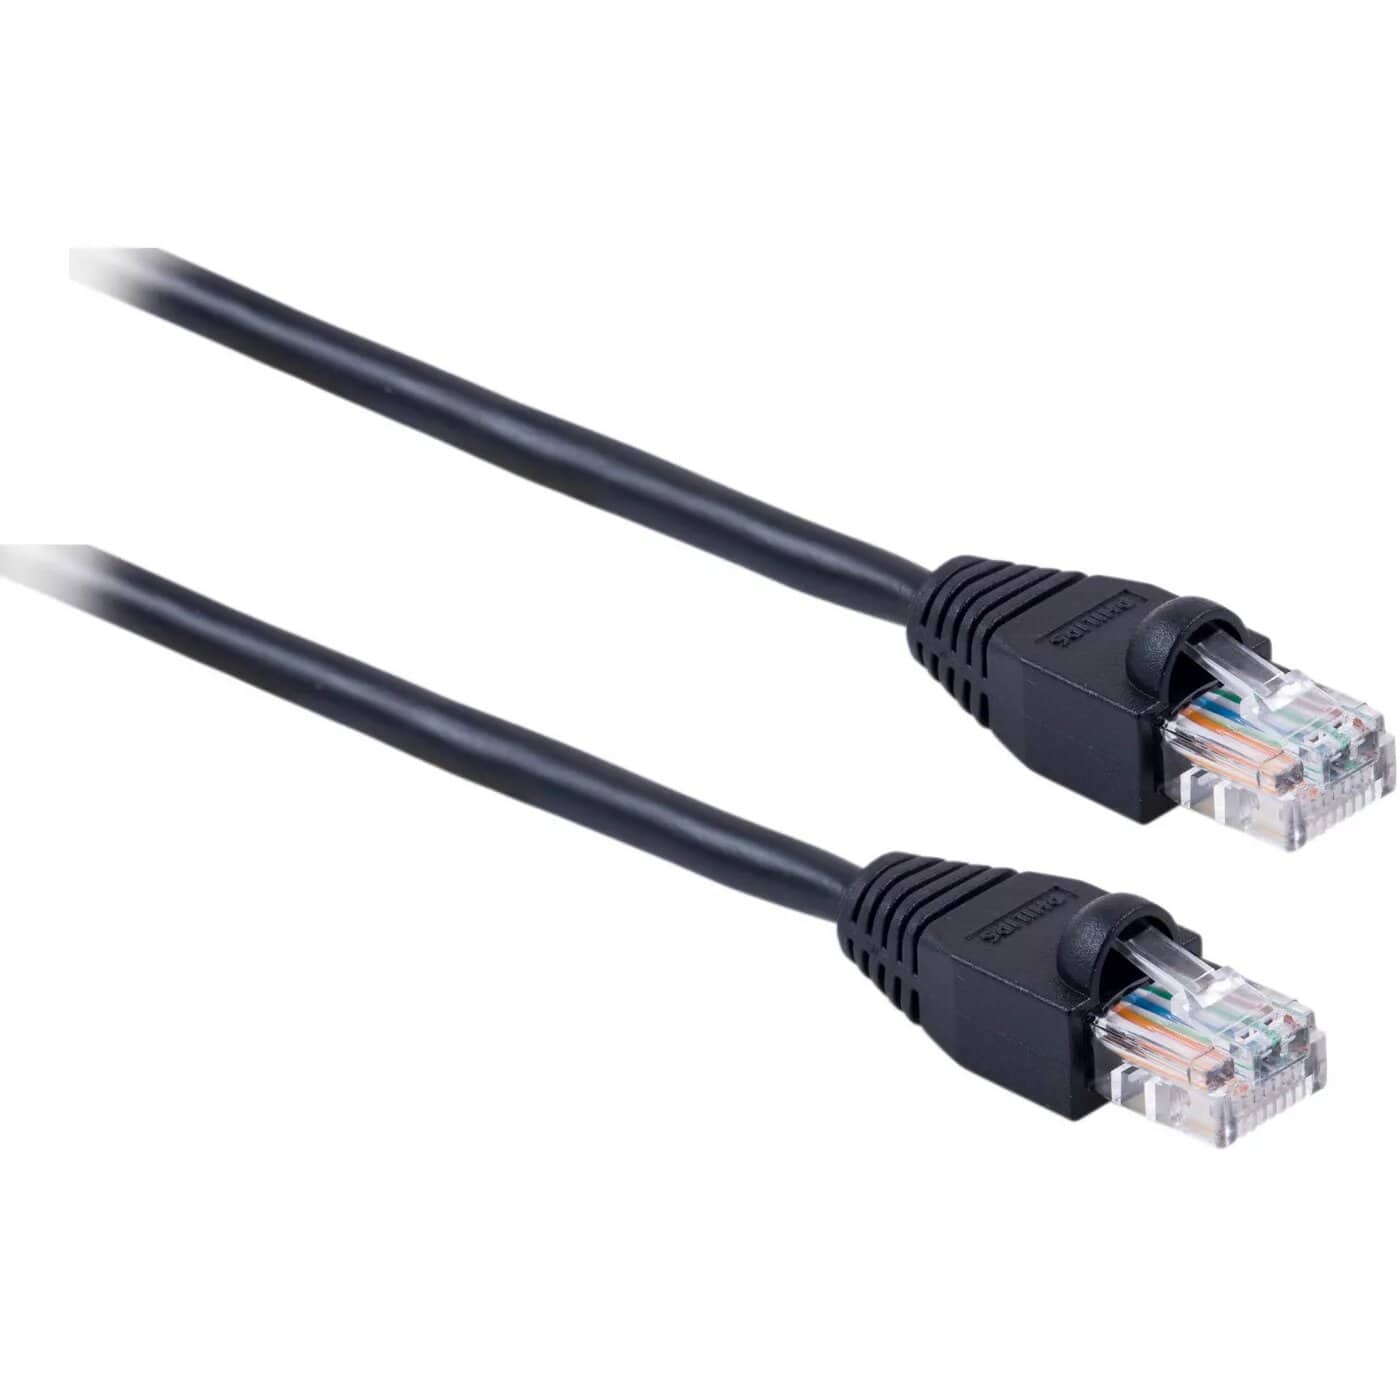 Internet cable (Ethernet CAT 5e) from PHILIPS, size 90 cm